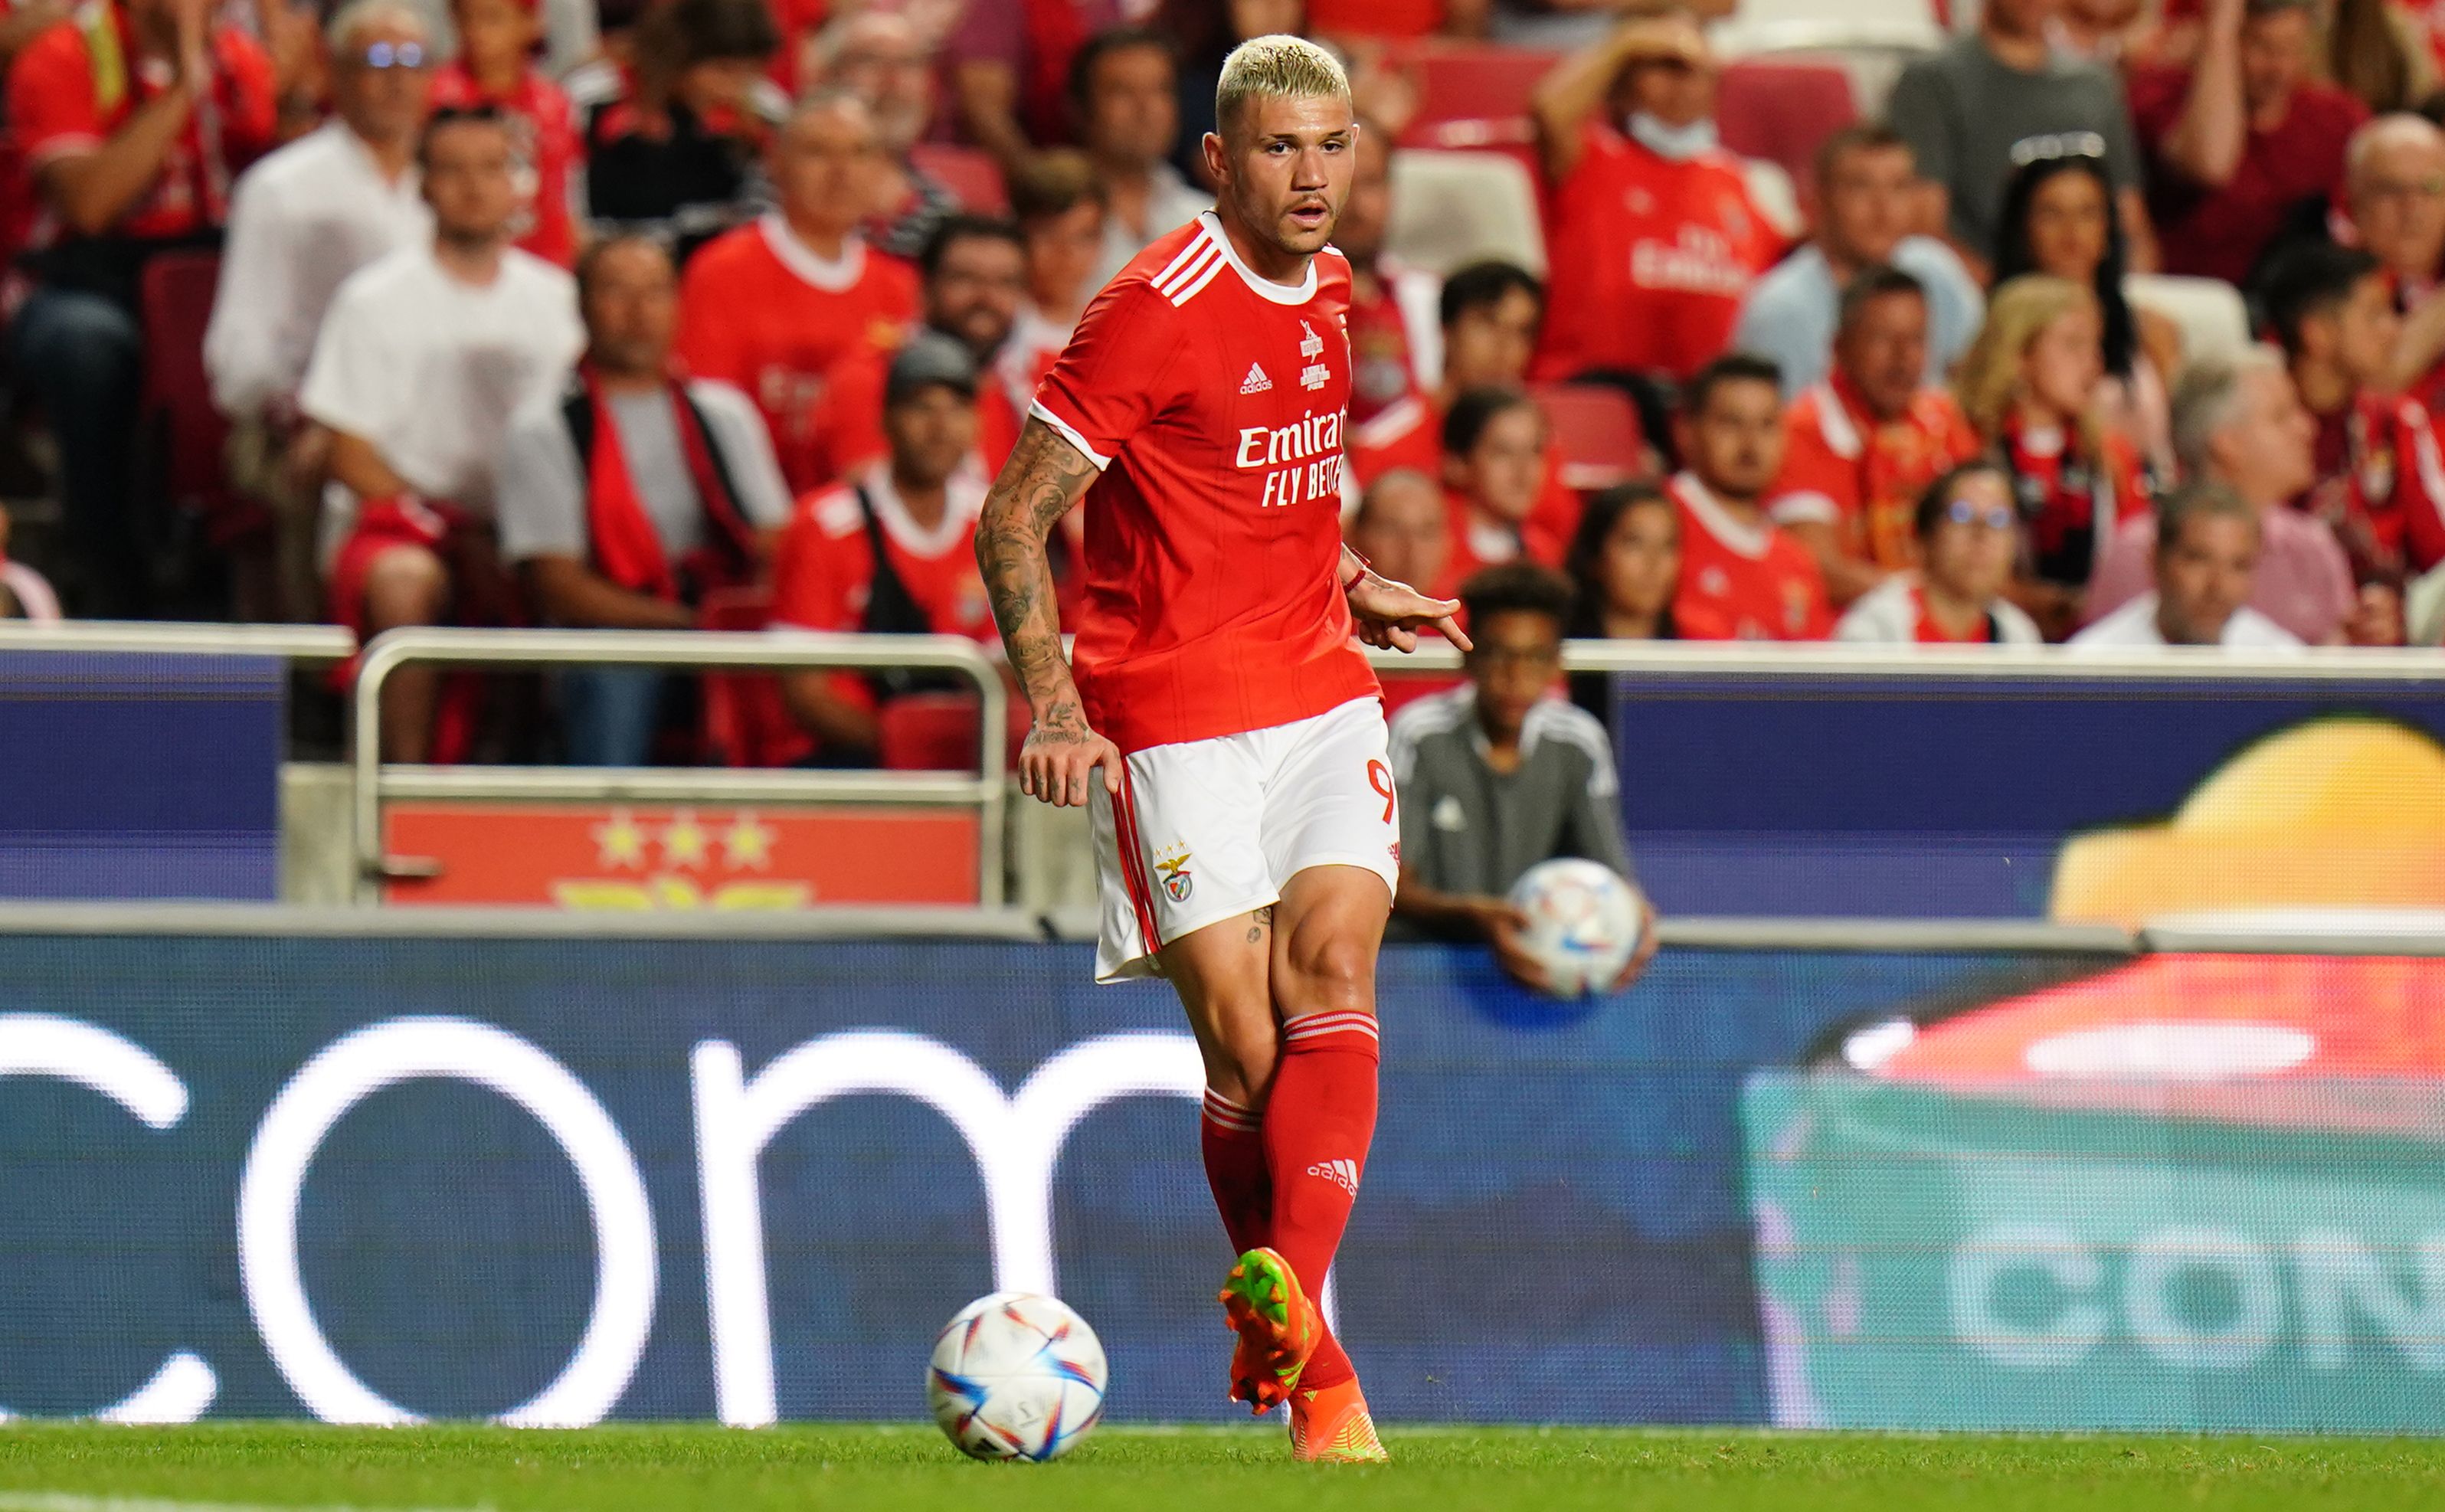 Morato of SL Benfica in action during the Eusebio Cup match between SL Benfica and Newcastle United